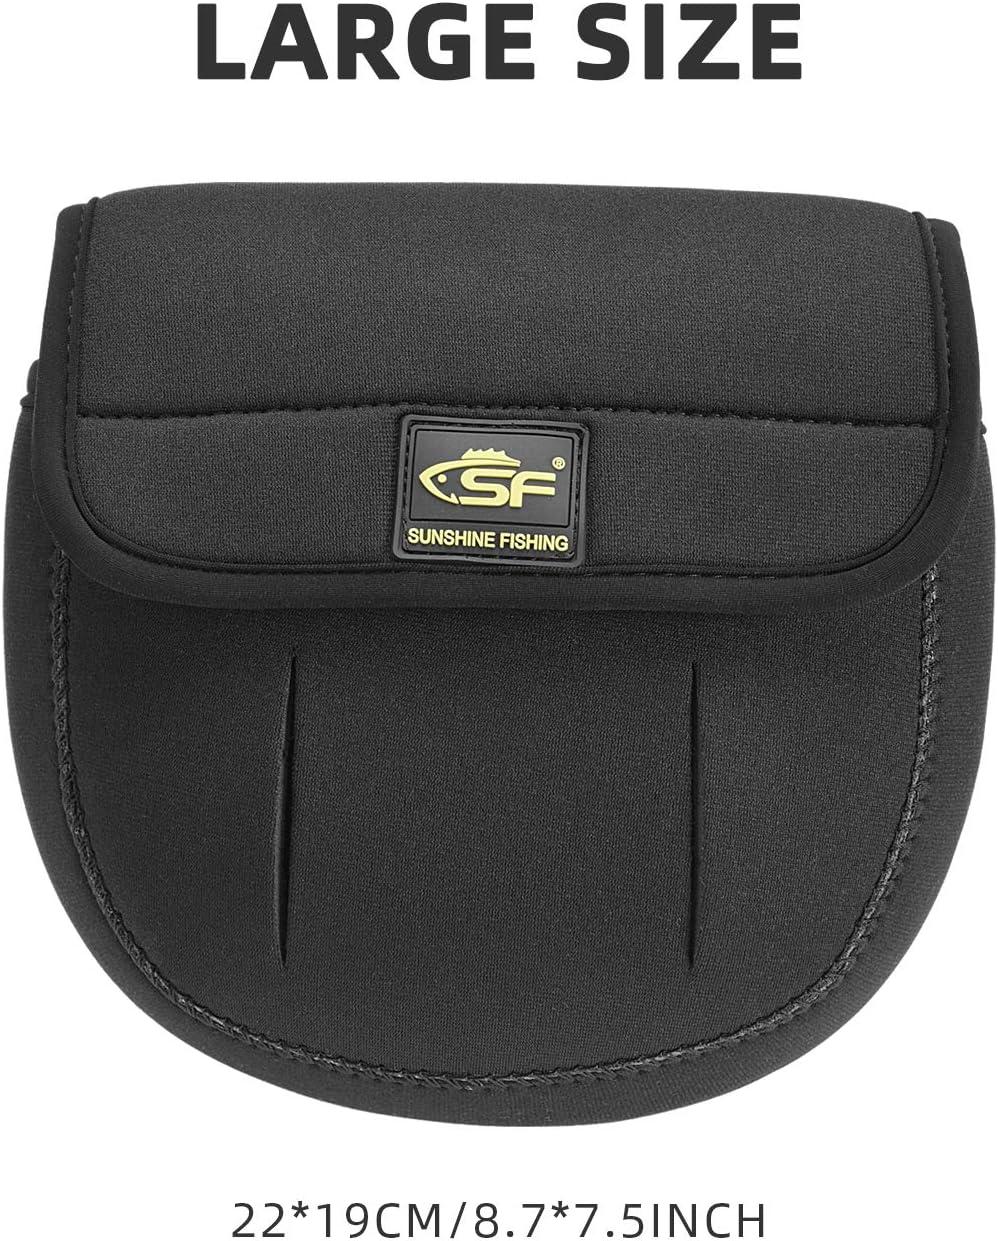 SF Spinning Reel Cover Case Bag Pouch Glove Fits 1000 2000 3000